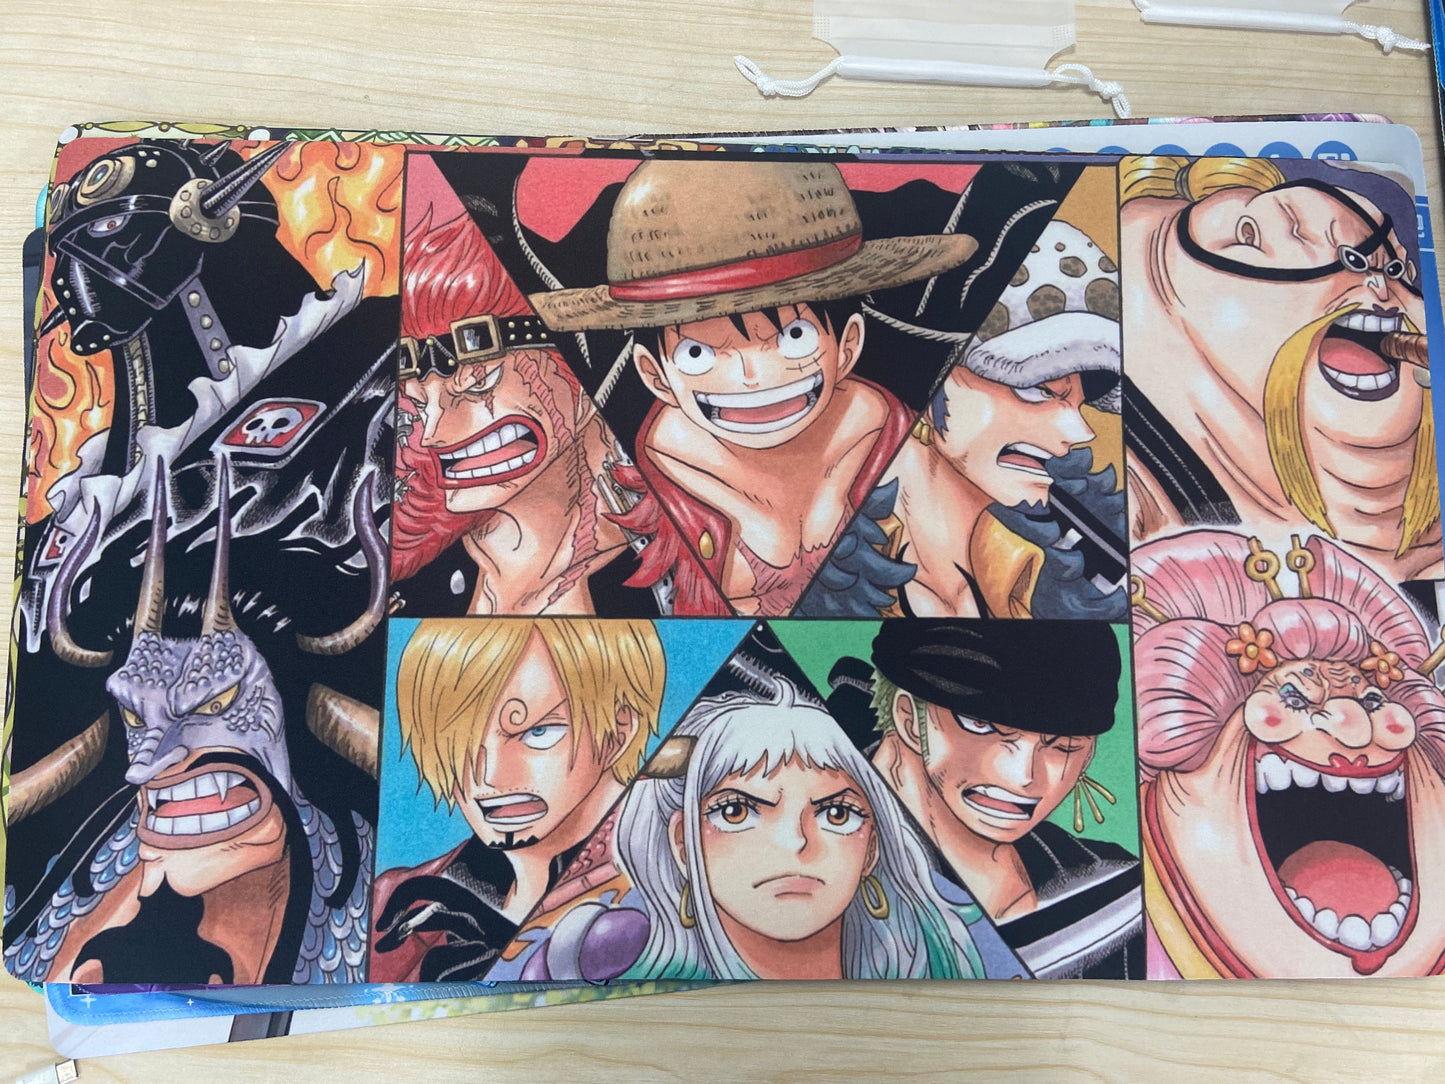 Playmat One Piece - Wano Comflict